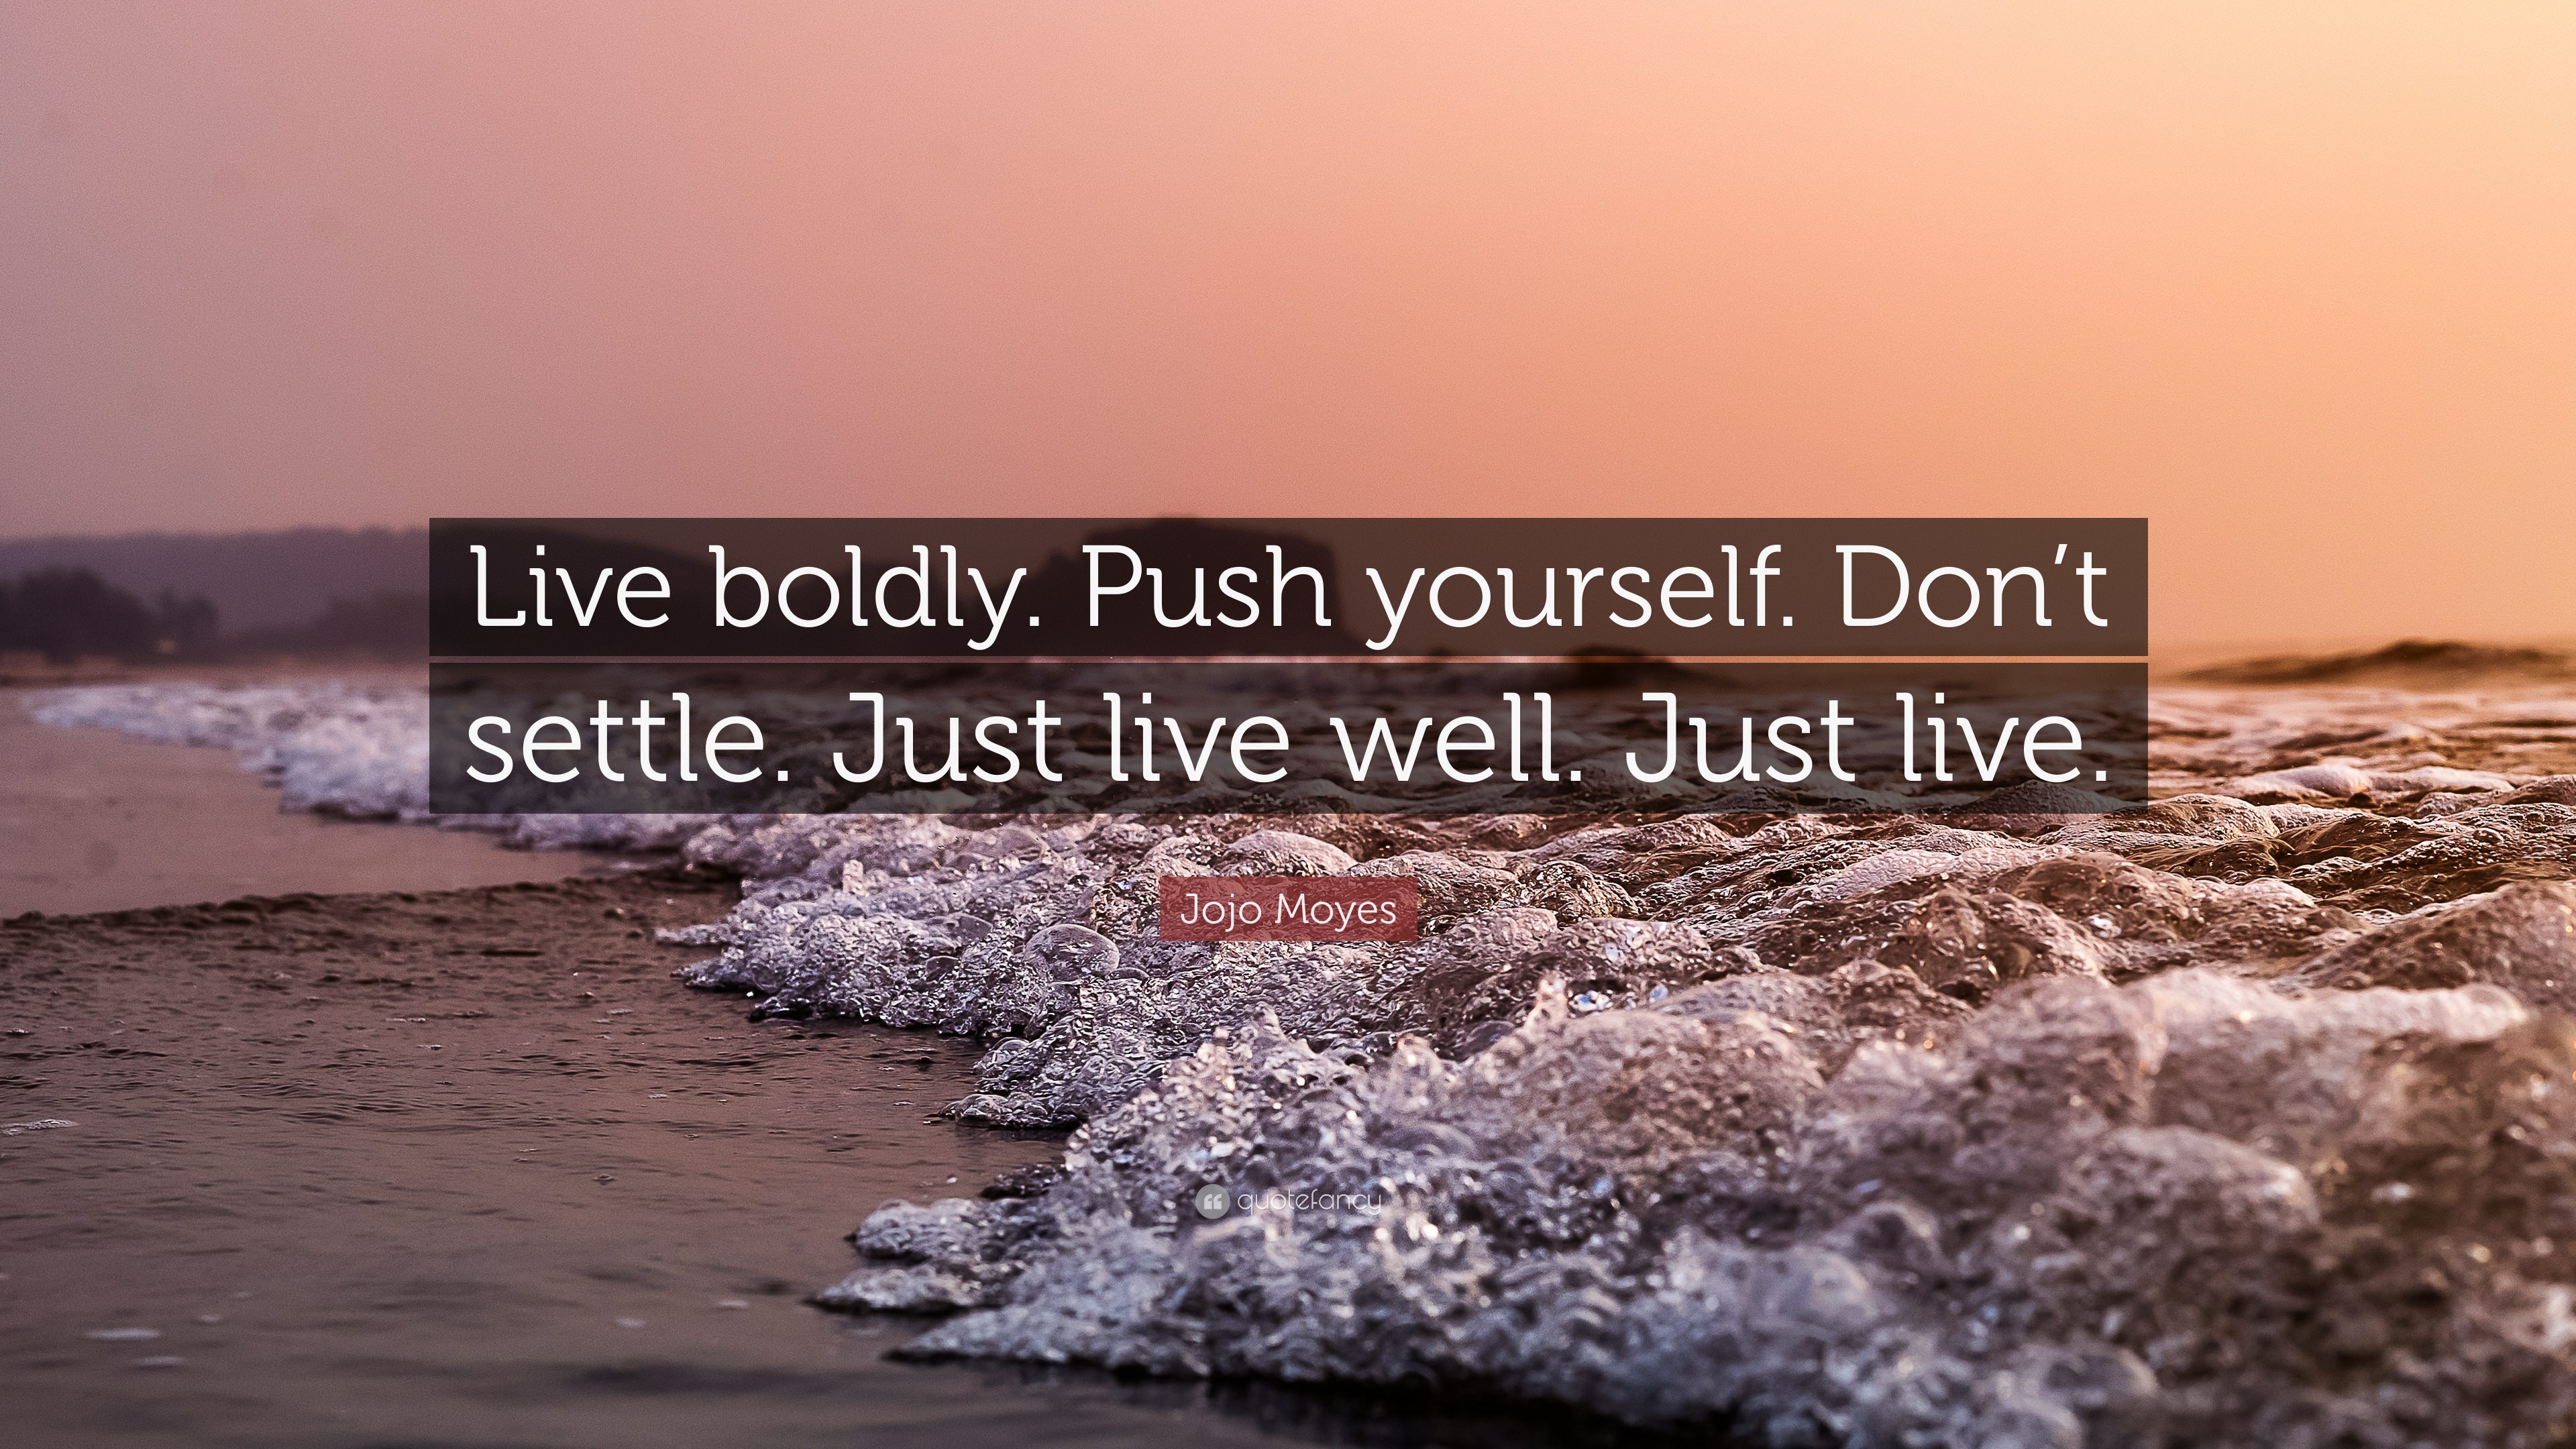 Jojo Moyes Quote Live Boldly Push Yourself Don T Settle Just Live Well Just Live